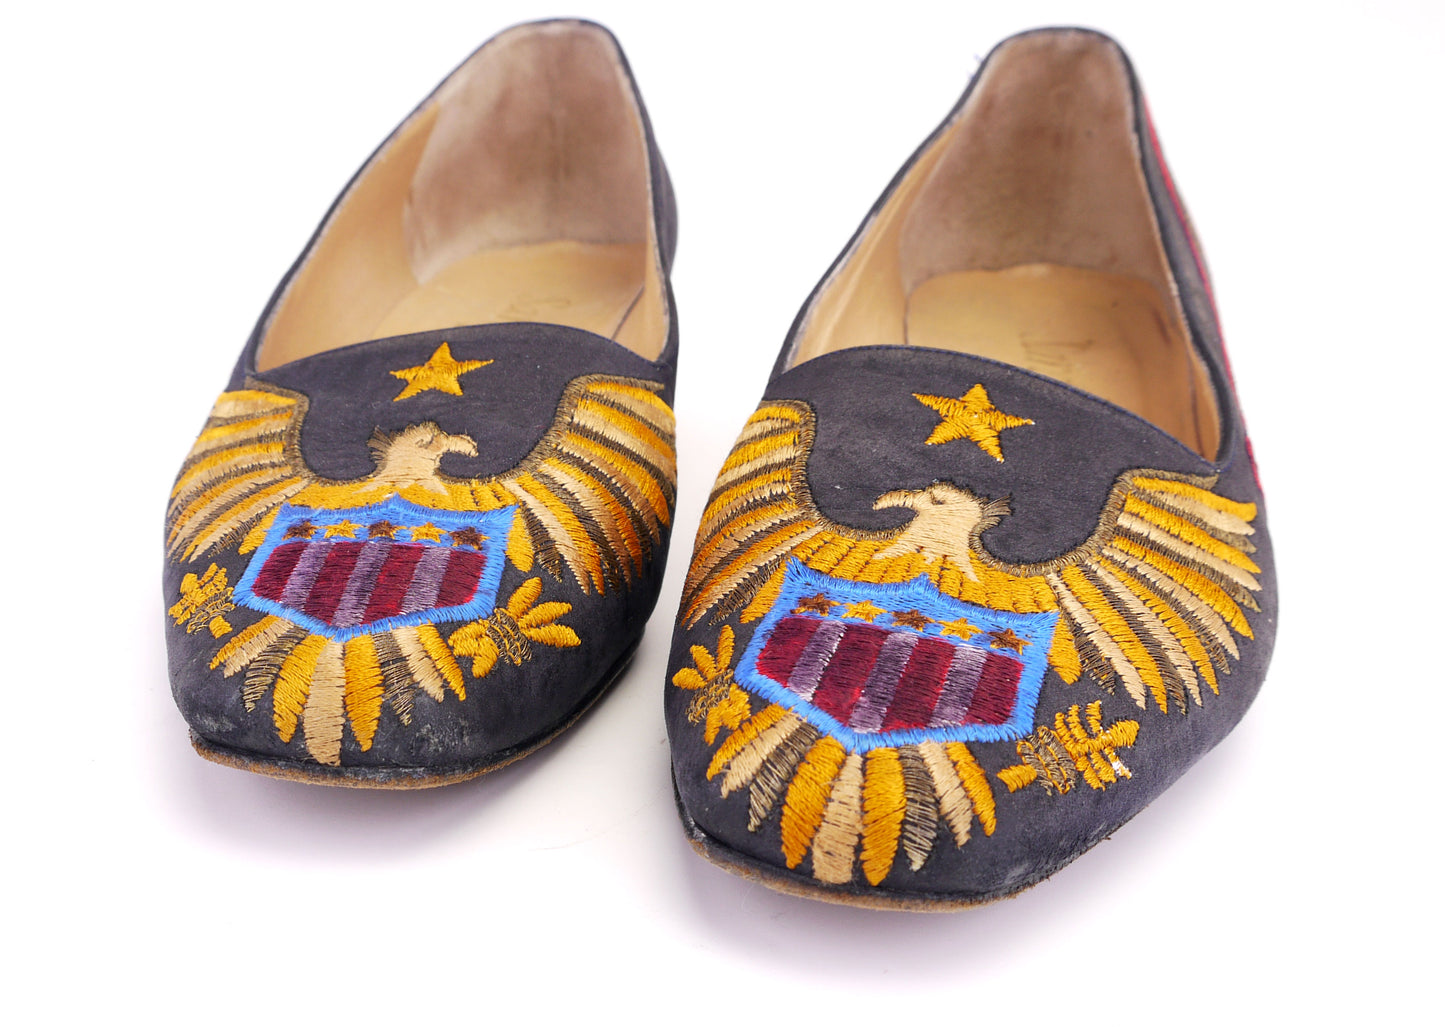 80s Embroidered City of Venice Flat Pumps UK 3